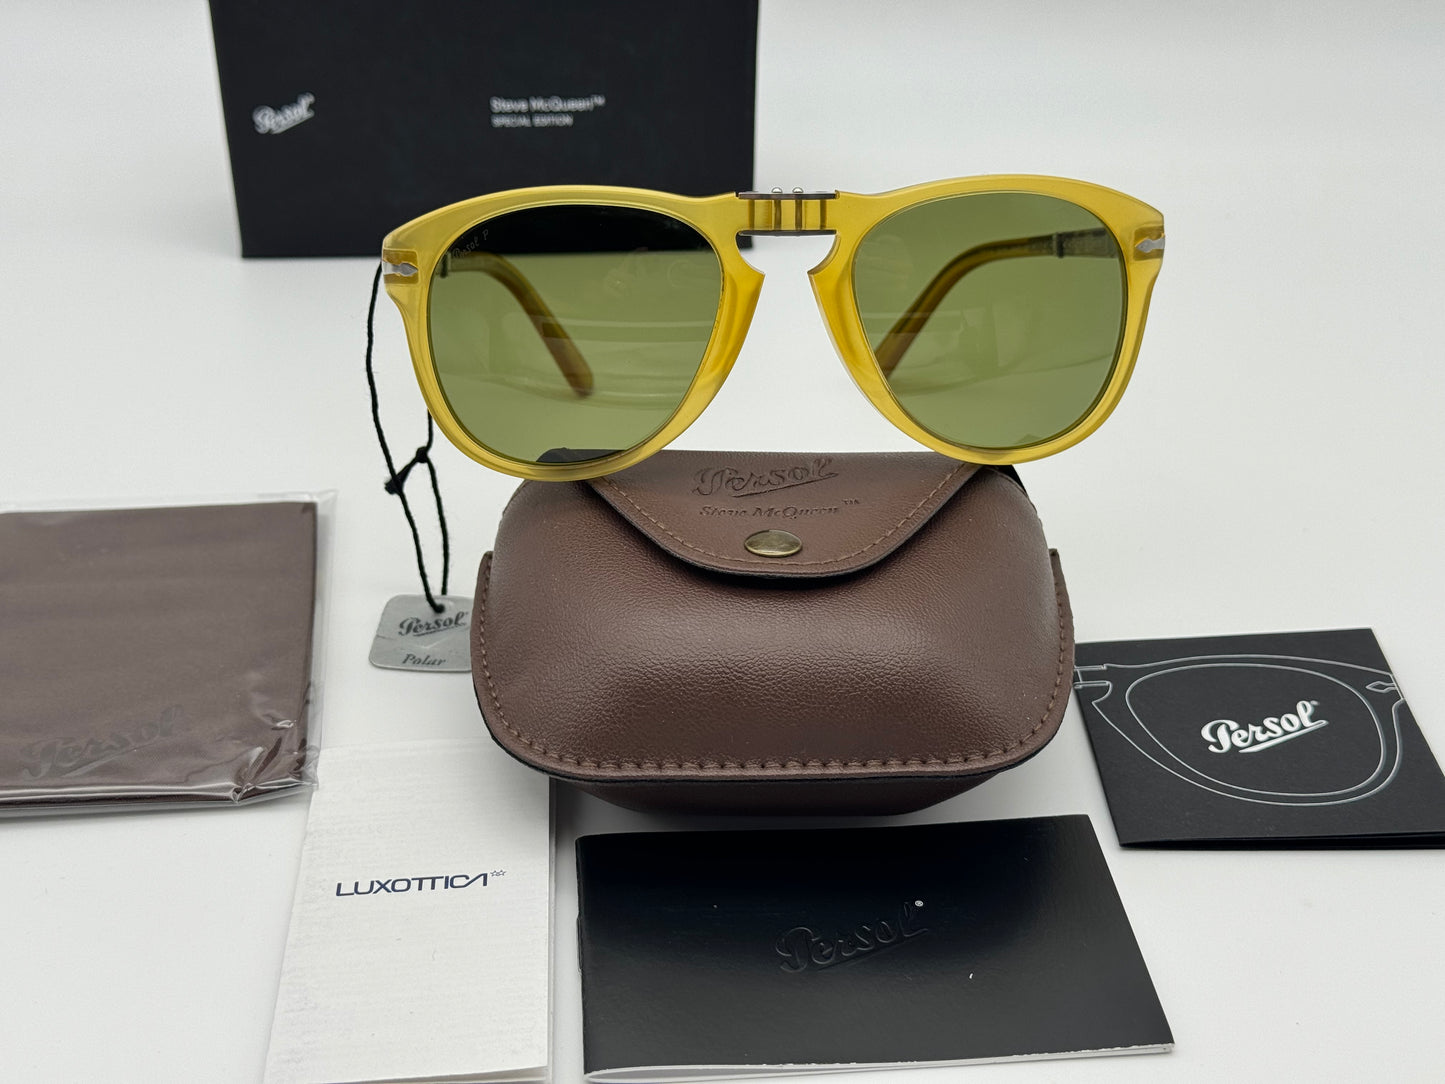 Persol PO 714 SM 54mm Steve McQueen Opal Yellow / Polarized Green 204 / P1 Italy NEW